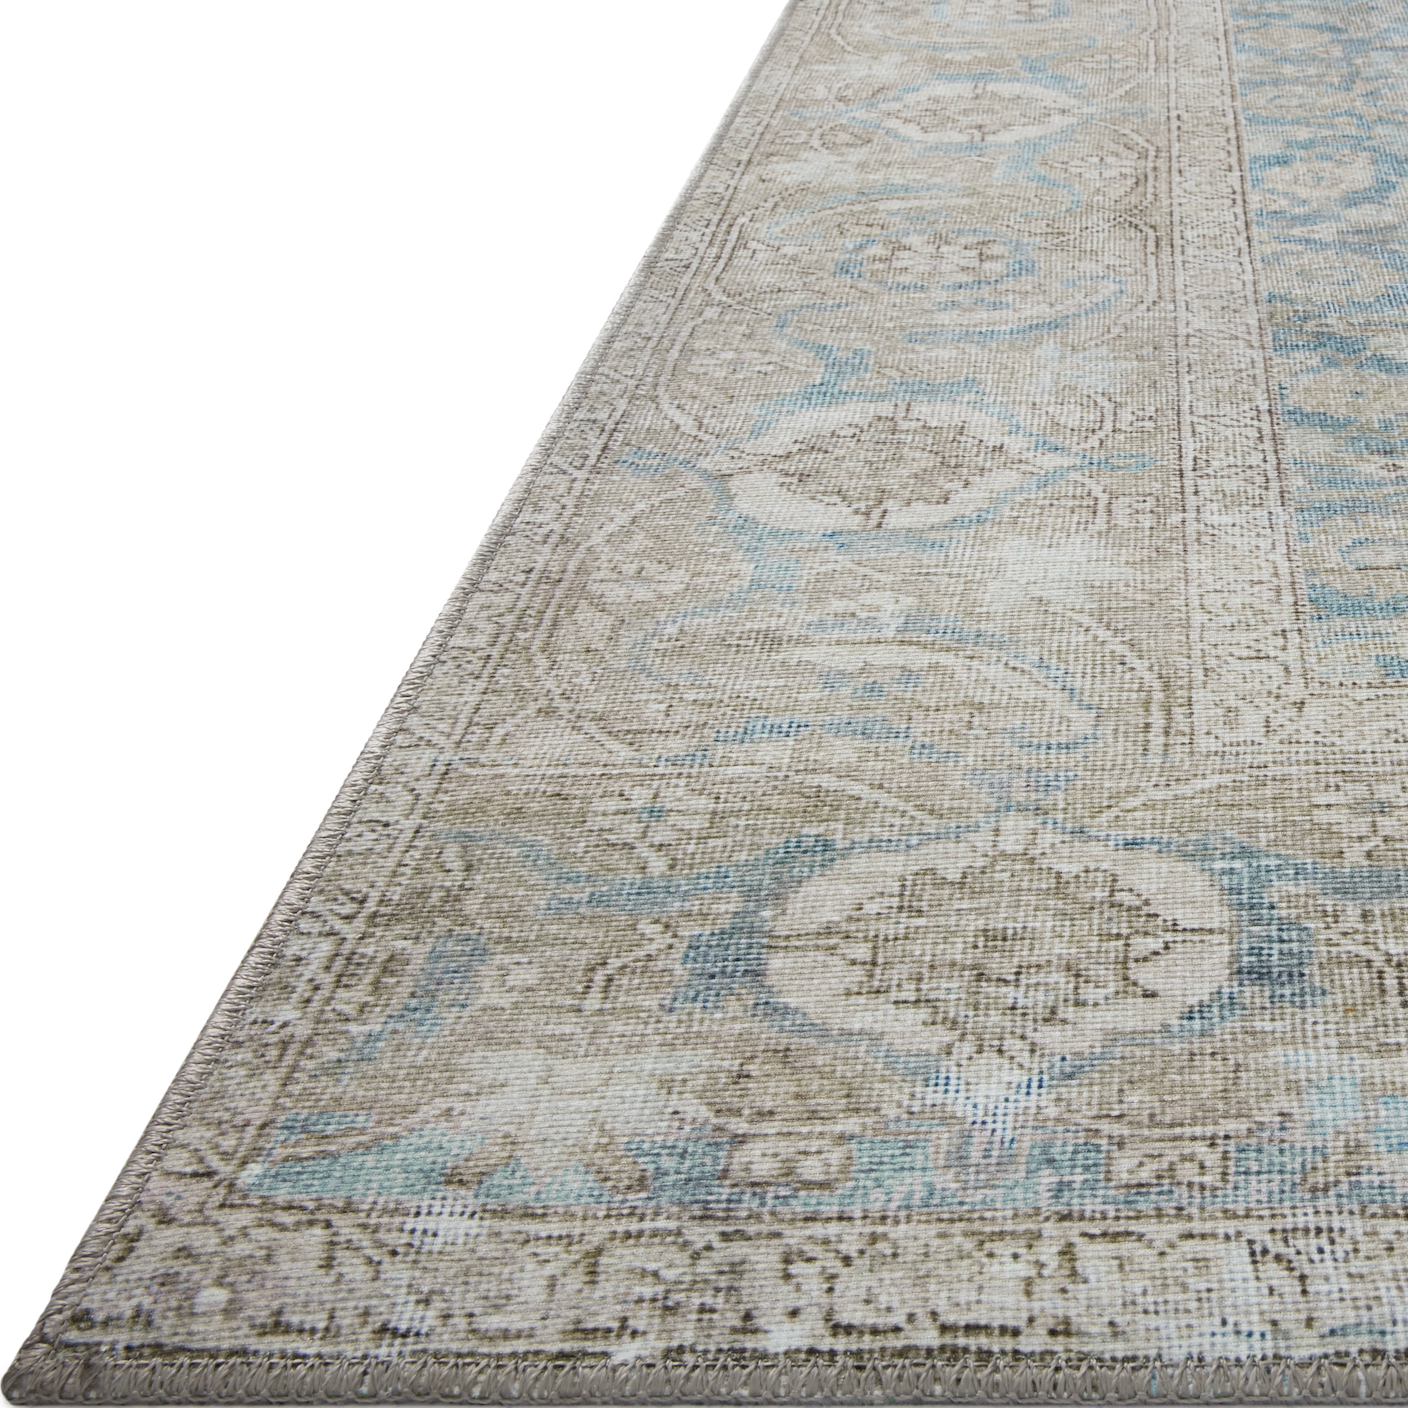 Power-loomed of 100% polyester, the Wynter Ocean / Silver WYN-10 area rug from Loloi showcases a one-of-a-kind vintage or antique area rug look at an affordable price. The rug is ideal for high traffic areas due to the rug's durability making it perfect for living rooms, dining rooms, kitchens, hallways, entryways. Amethyst Home provides interior design, new construction, custom furniture, and rugs for the Kansas City, Liberty, Olathe, Leawood, Overland Park Kansas and Missouri metro area.